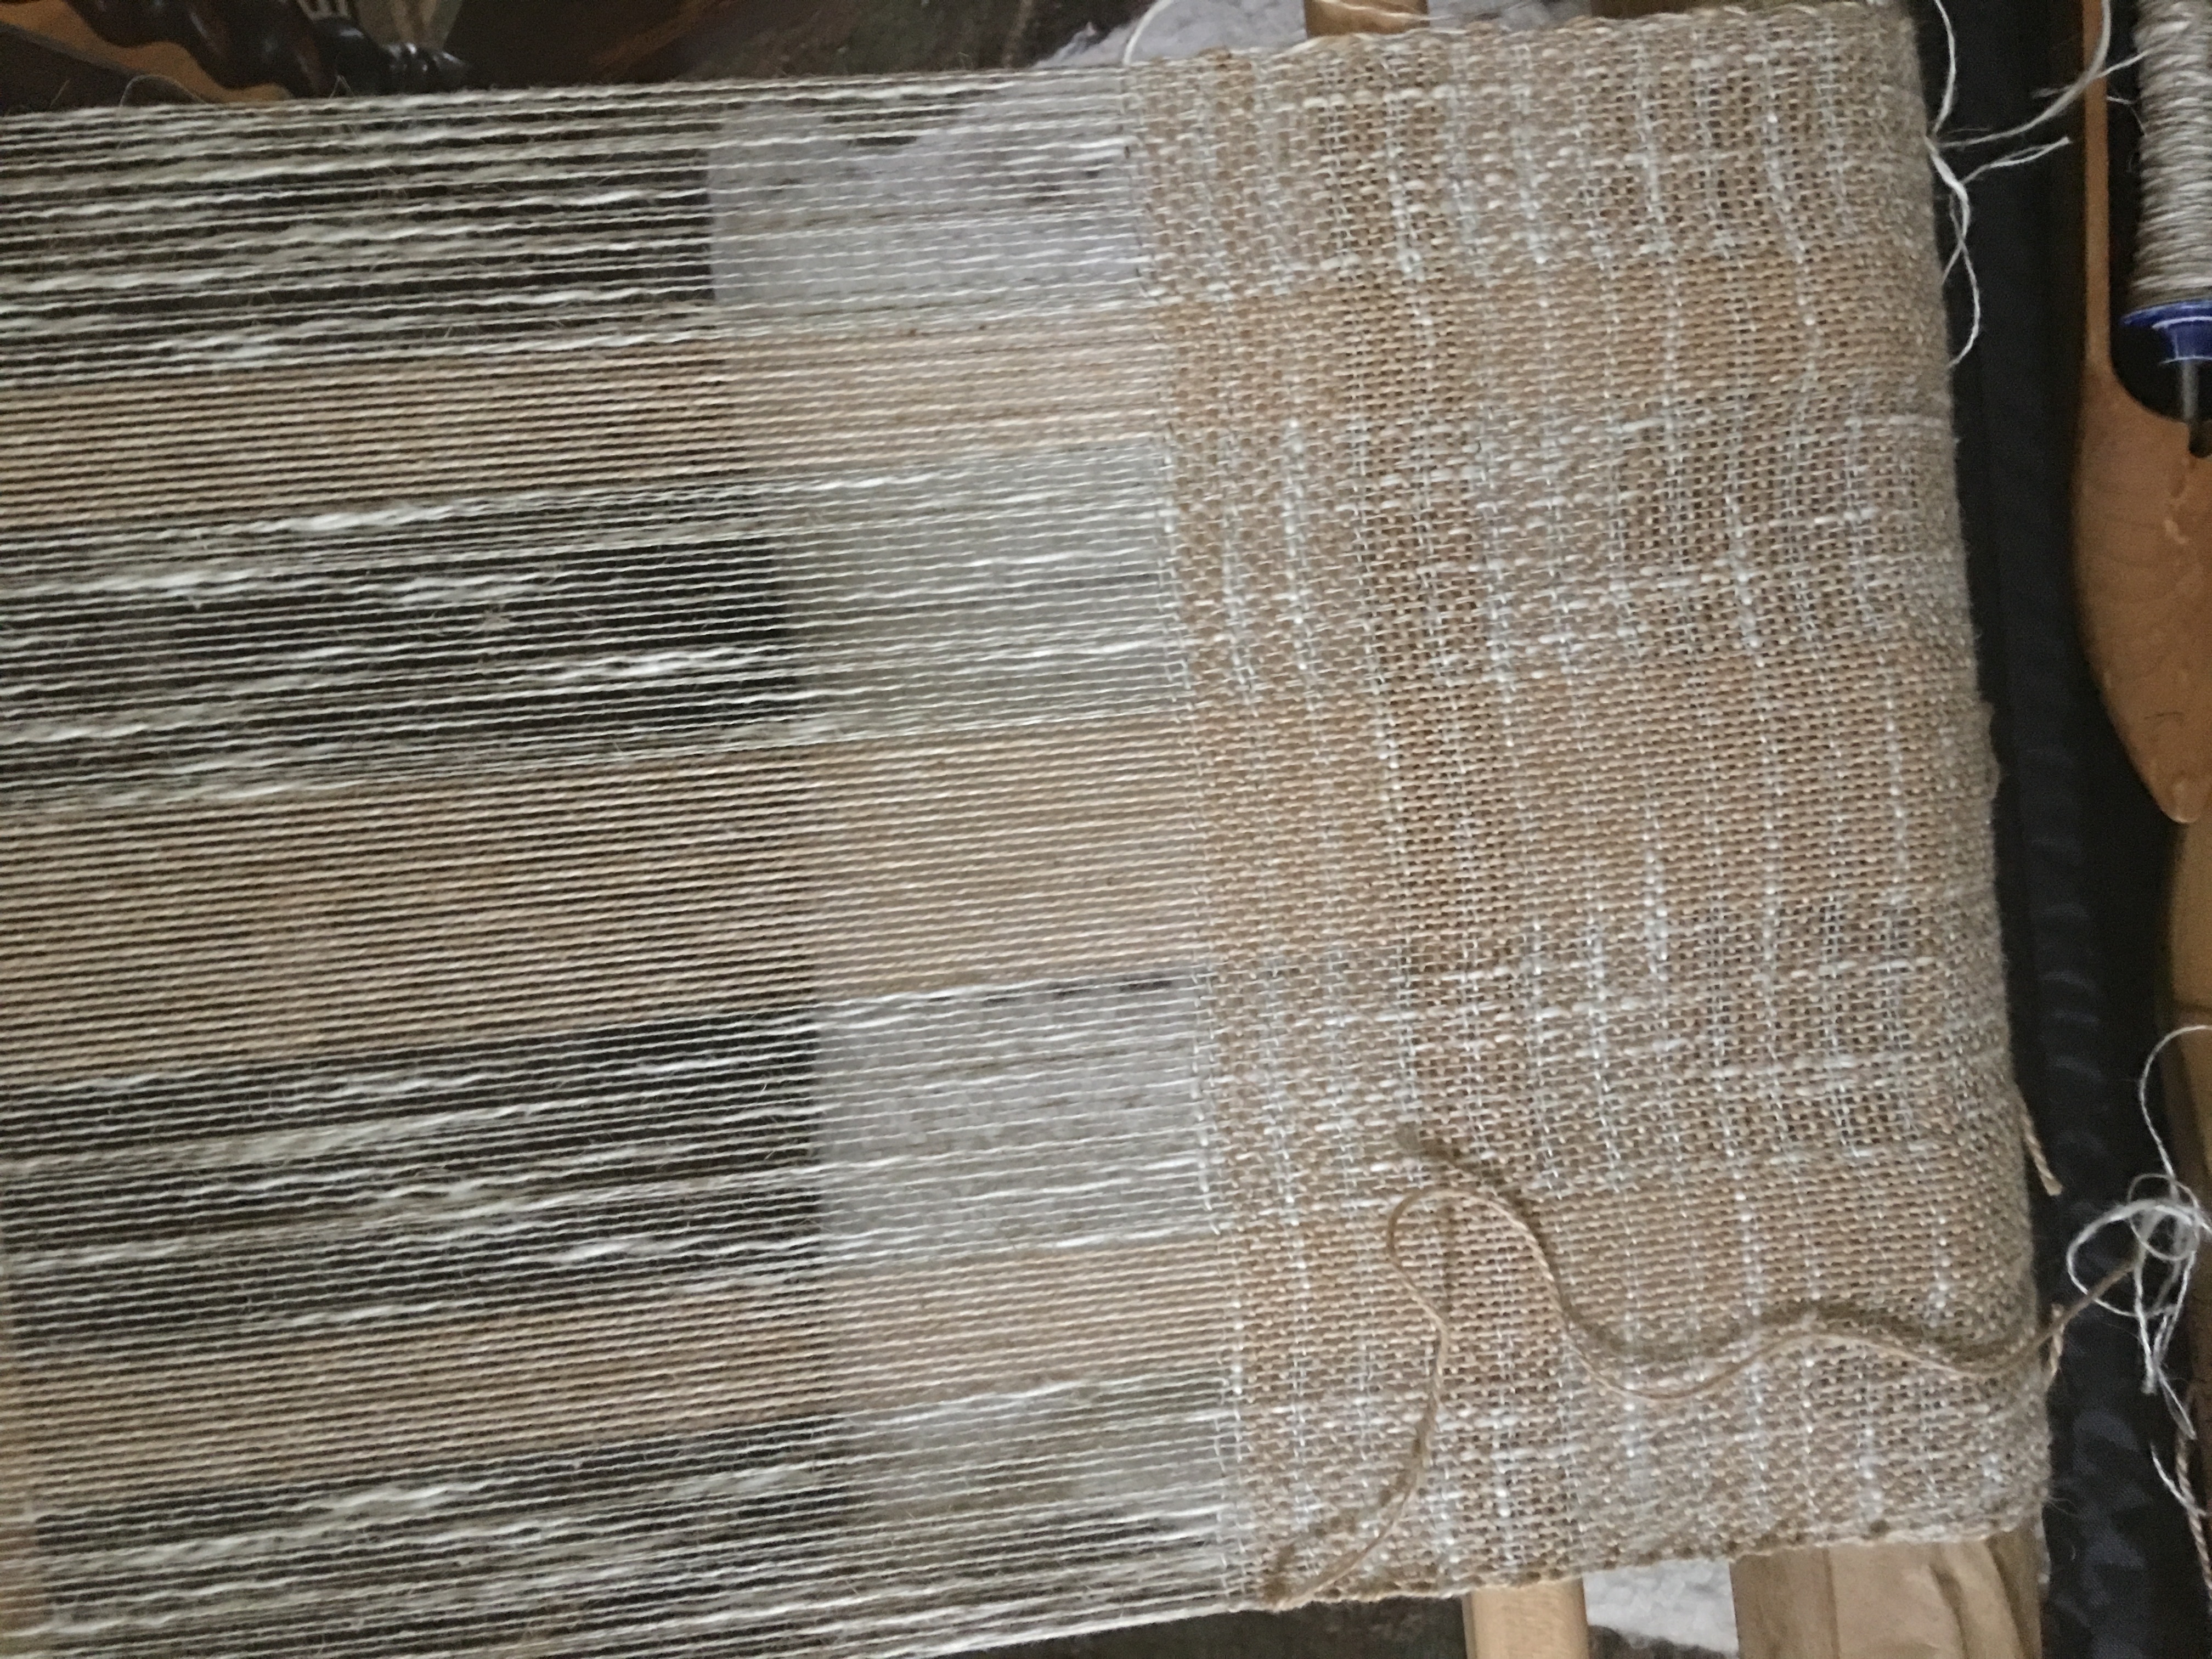 Treadle to the Metal | Plain Weave and beyond